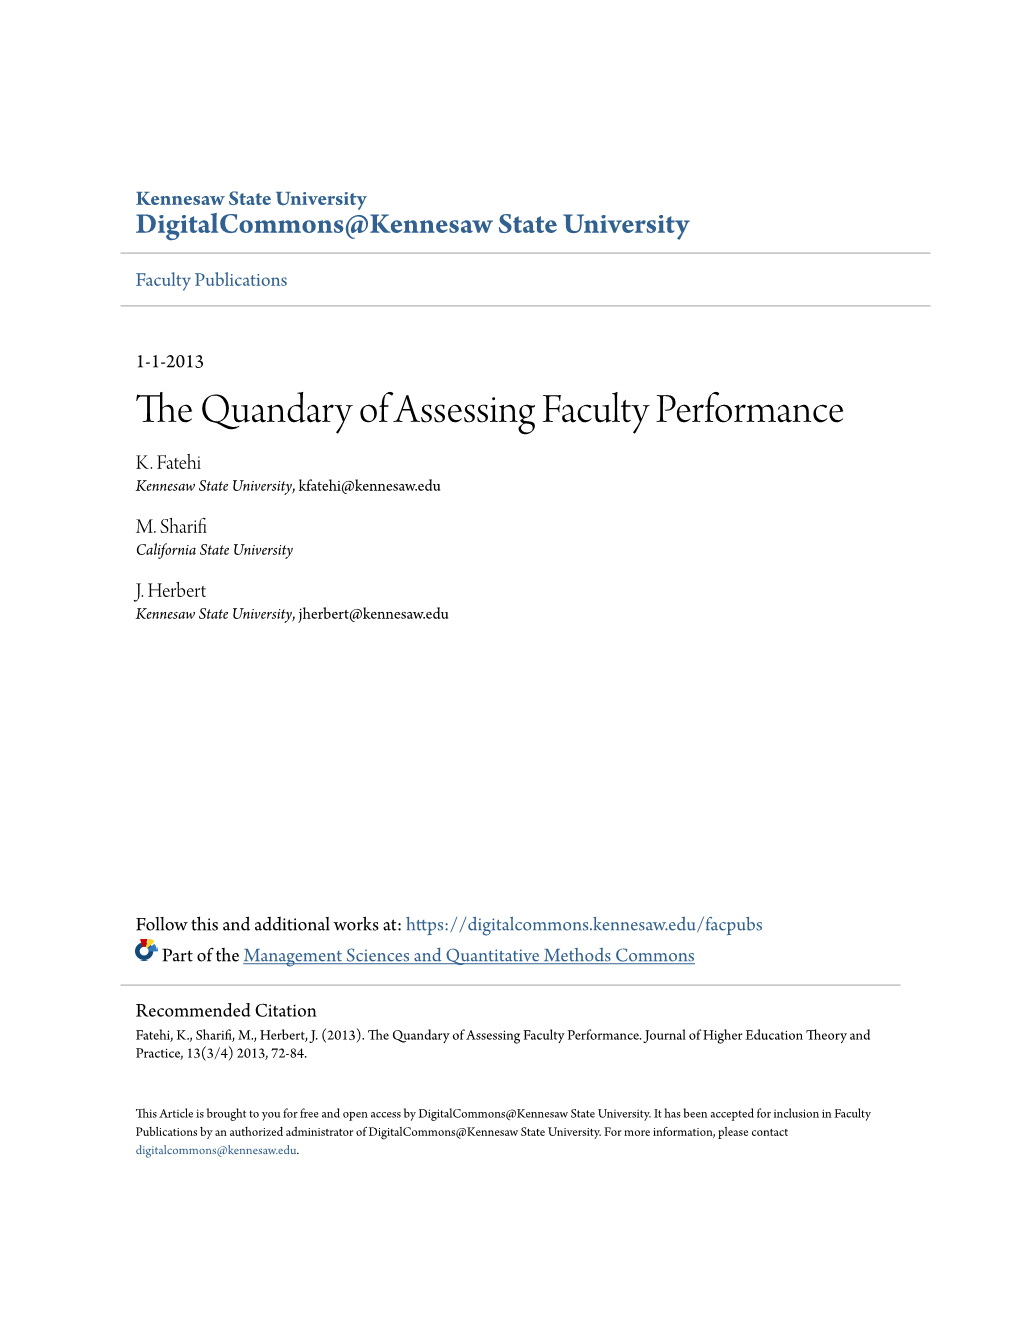 The Quandary of Assessing Faculty Performance K